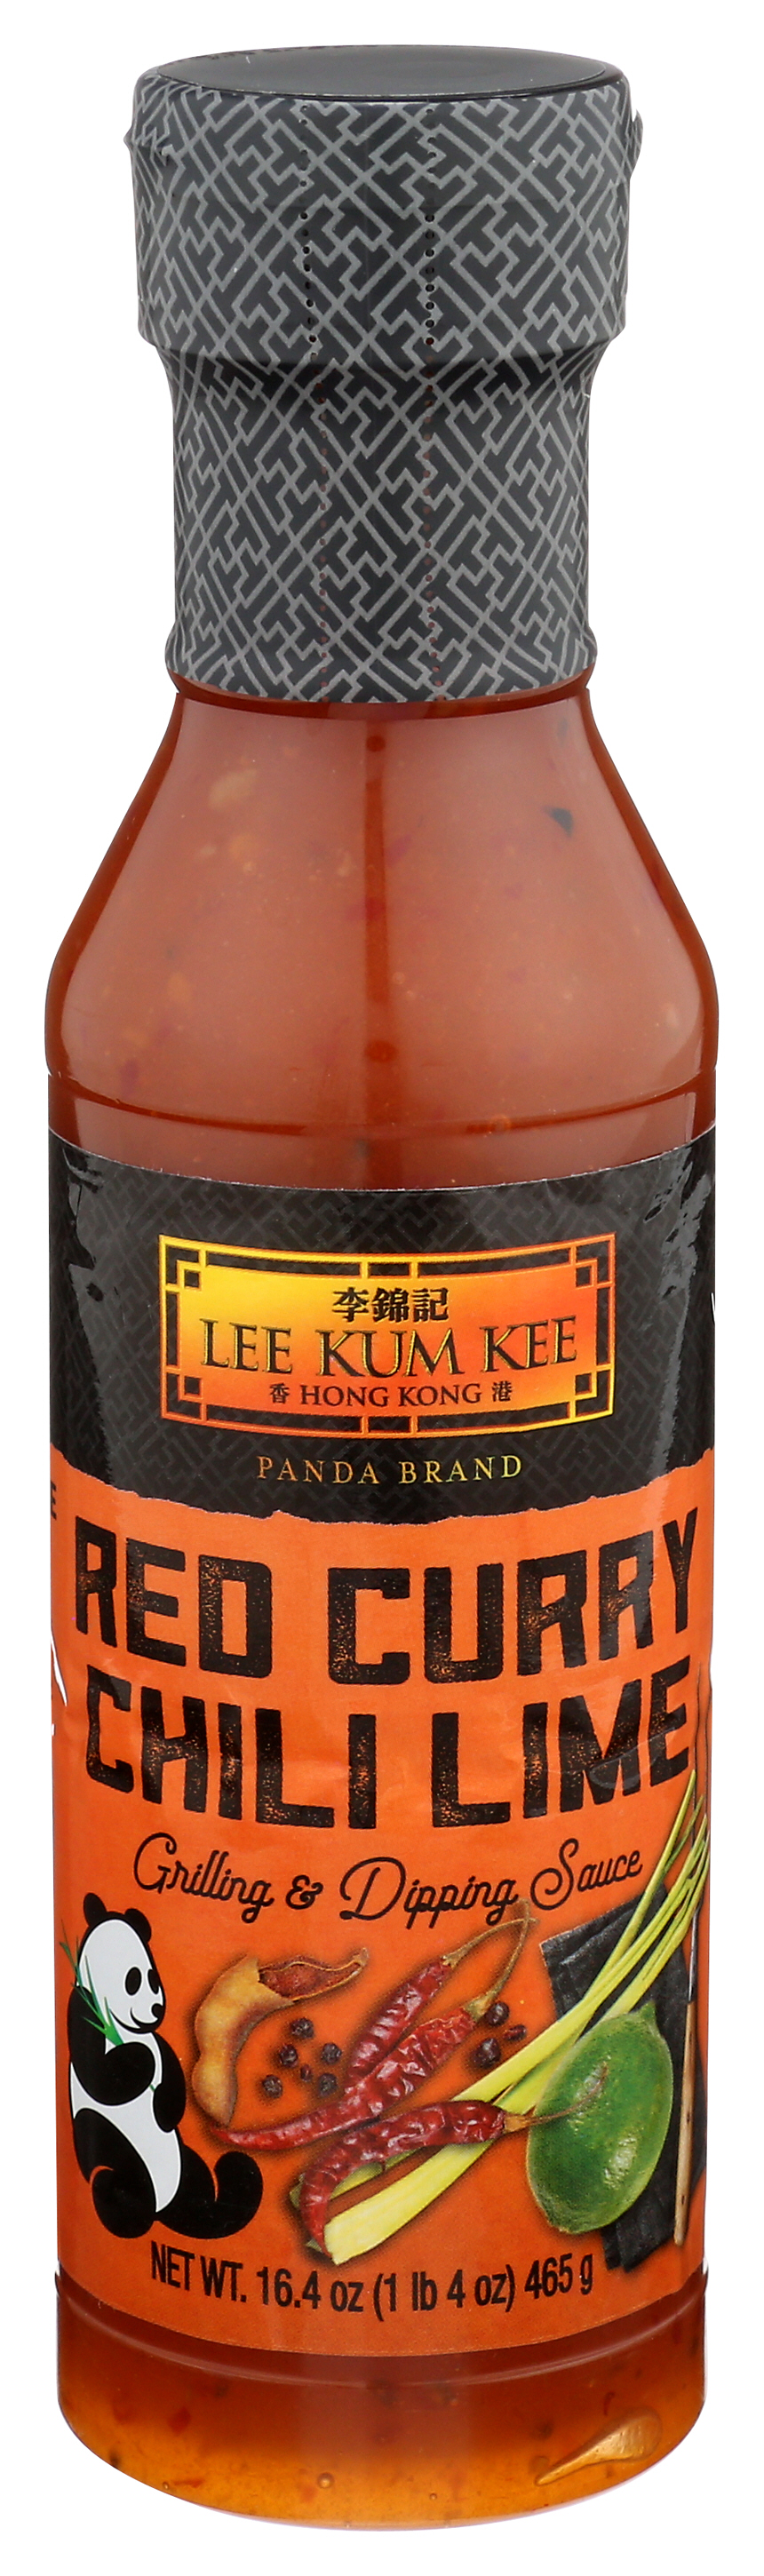 Panda Brand Red Curry Chili Lime Grilling & Dipping Sauce, 16.4 oz